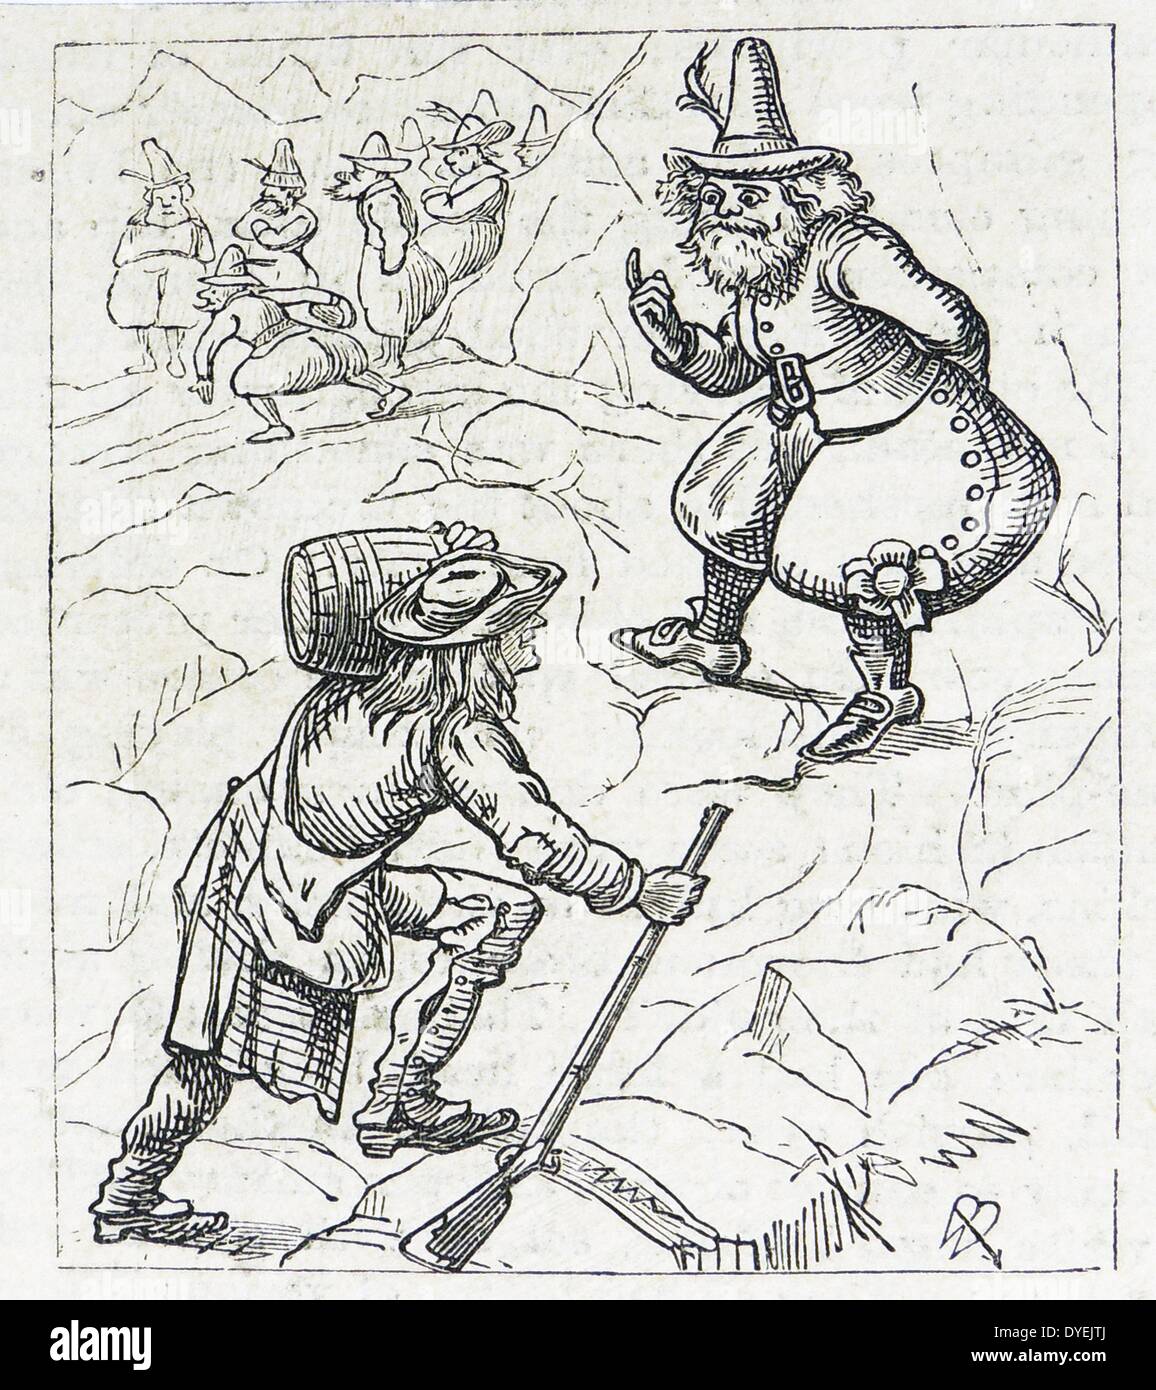 Rip Van Winkle meets the old man in the mountains, helps carry the liquor,  gets drunk and falls into his long sleep. Illustration for the story by  Washington Irving first published in